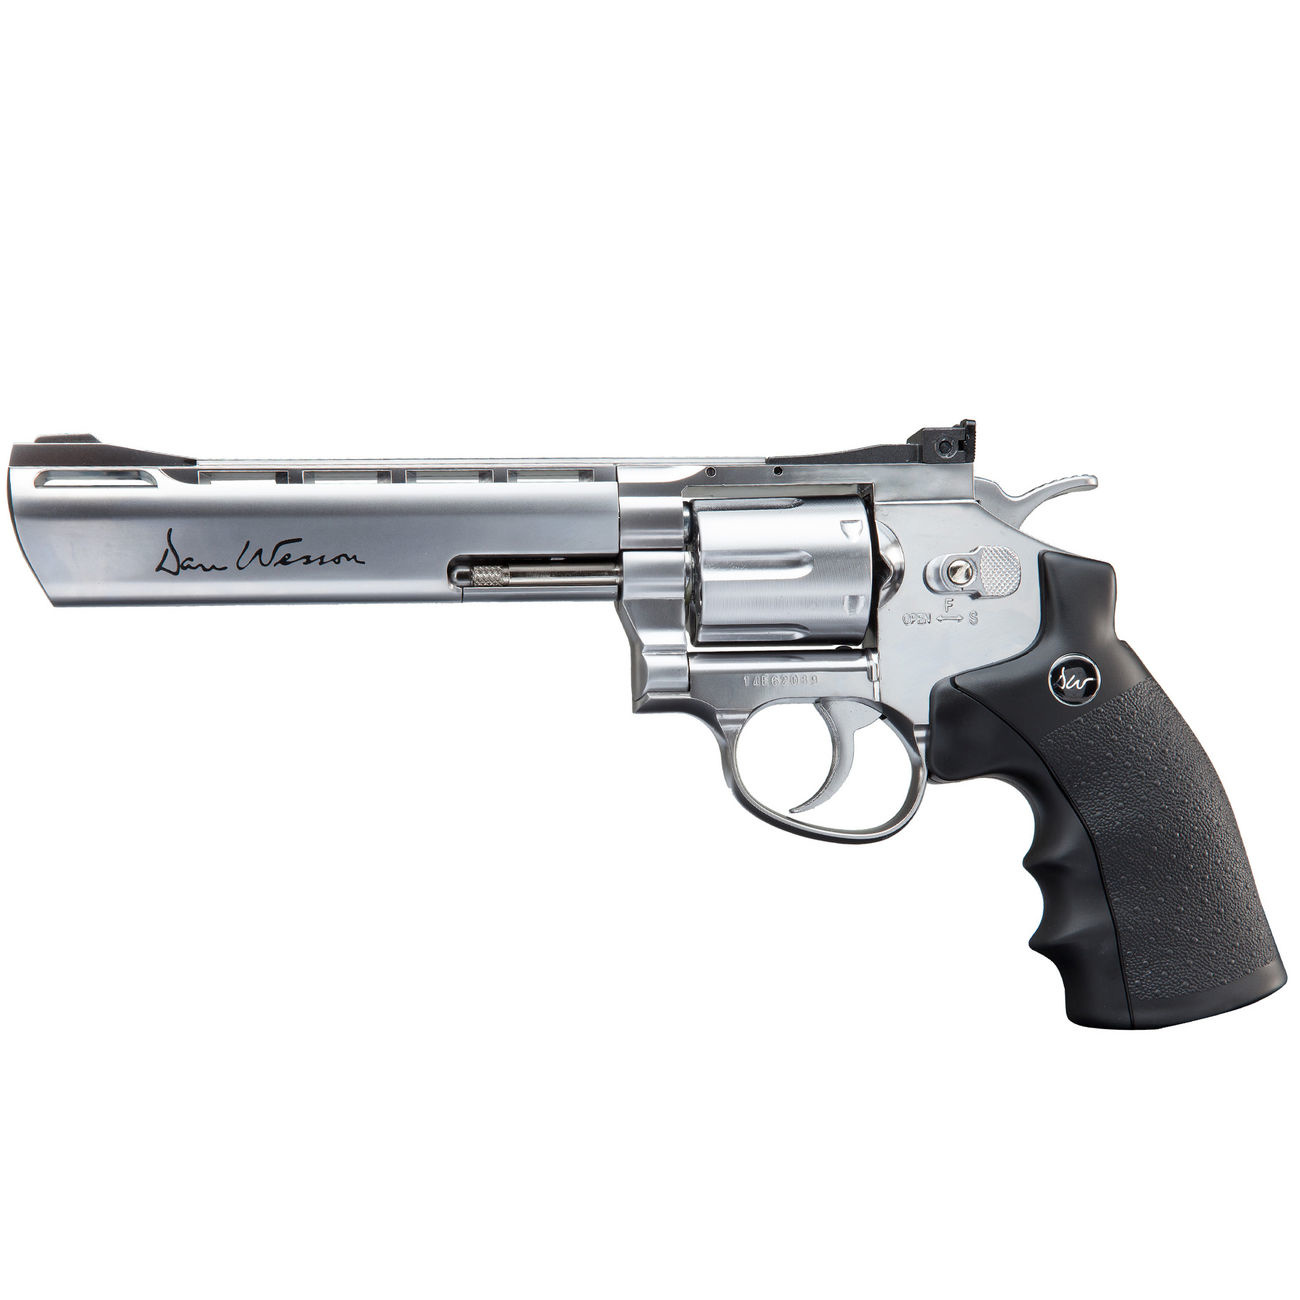 ASG 6 inch Dan Wesson Revolver Co2 NBB 1.90 Joule - Silver